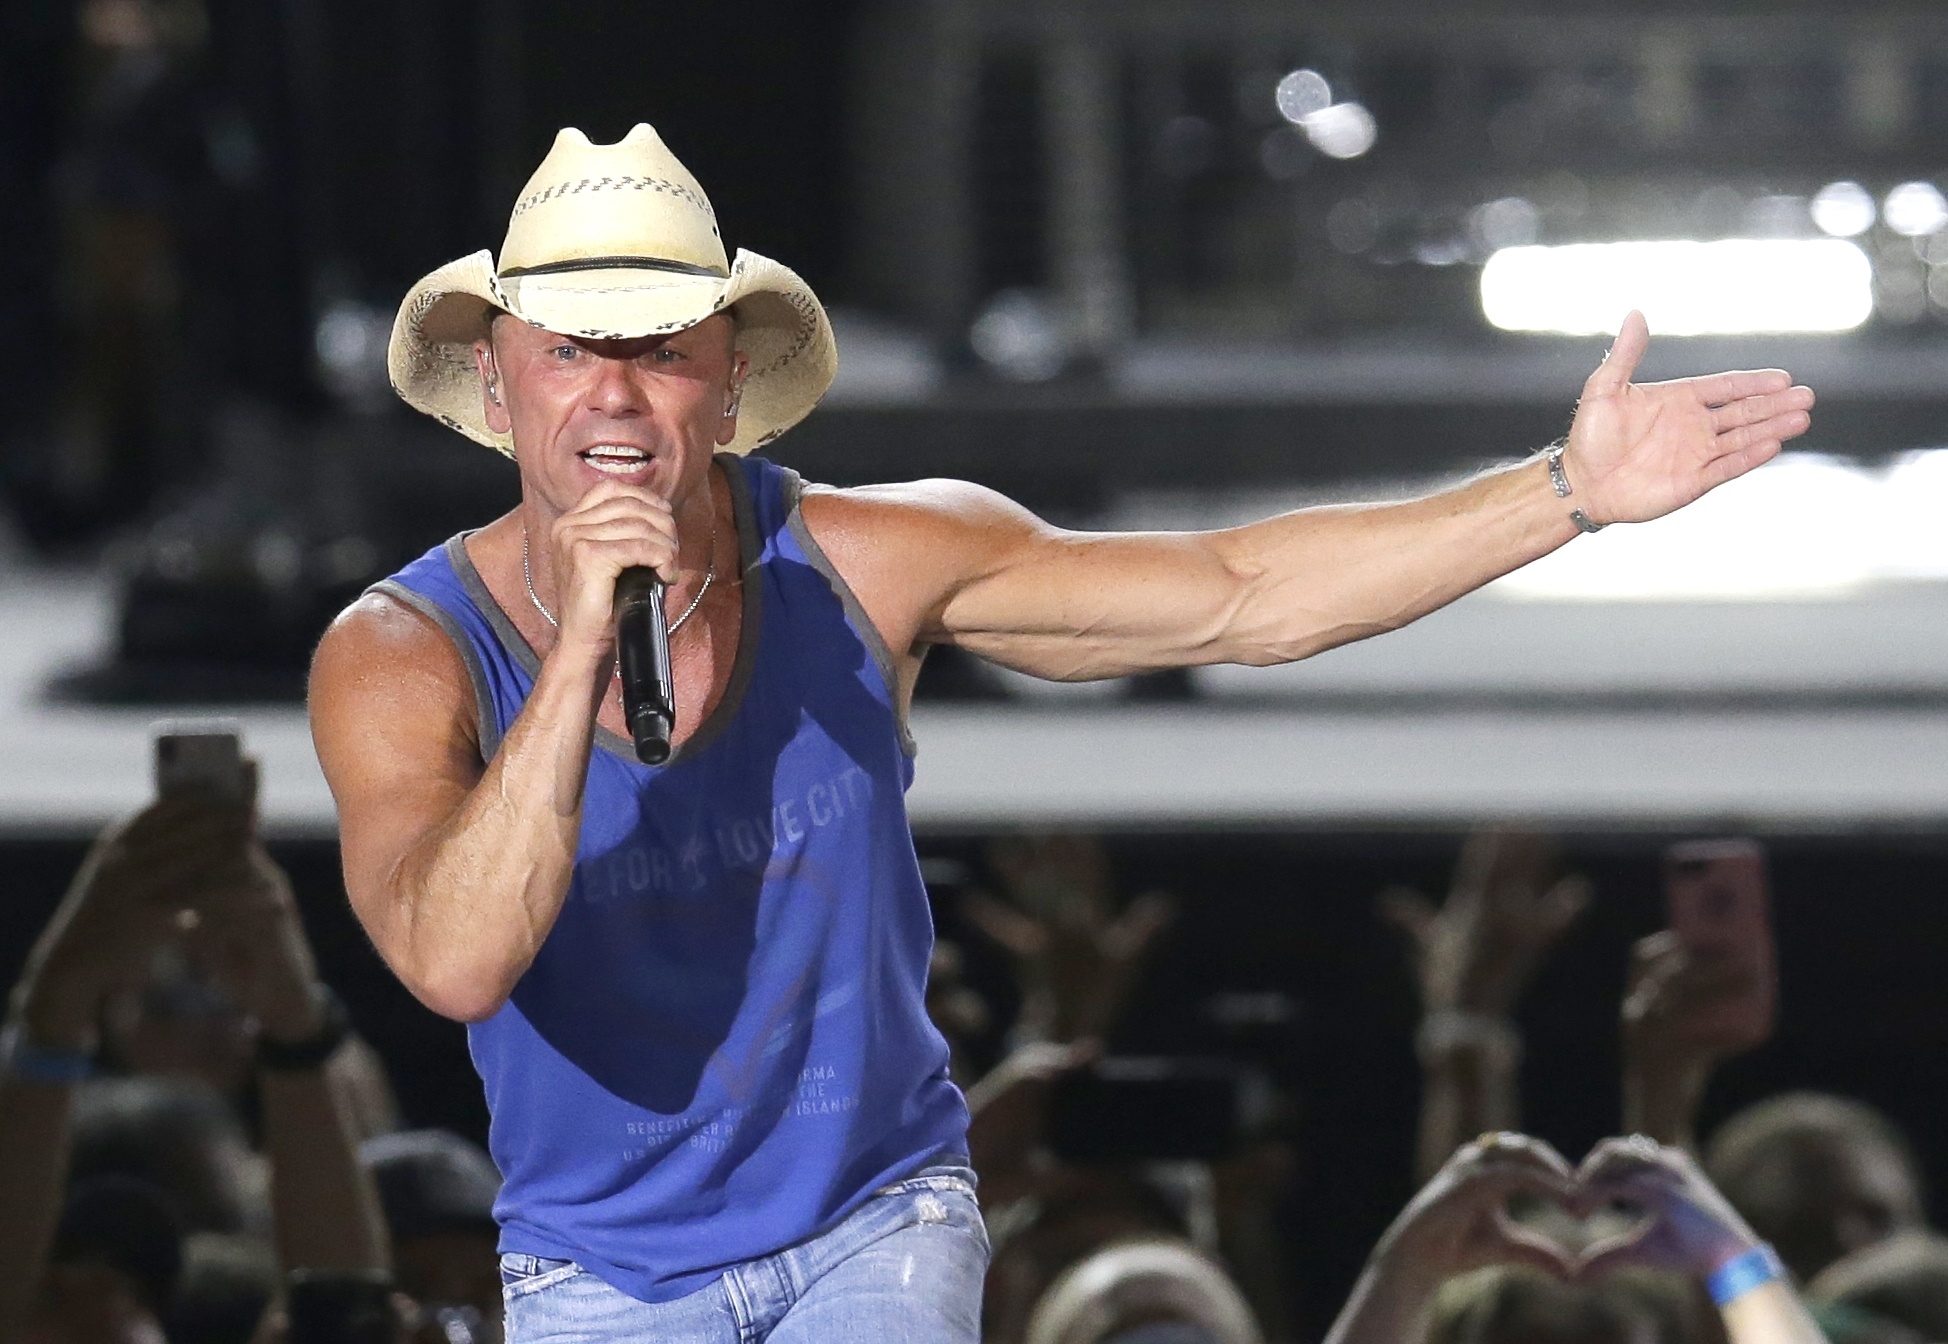 Kenny Chesney Wallpaper posted by Sarah Simpson 1950x1350